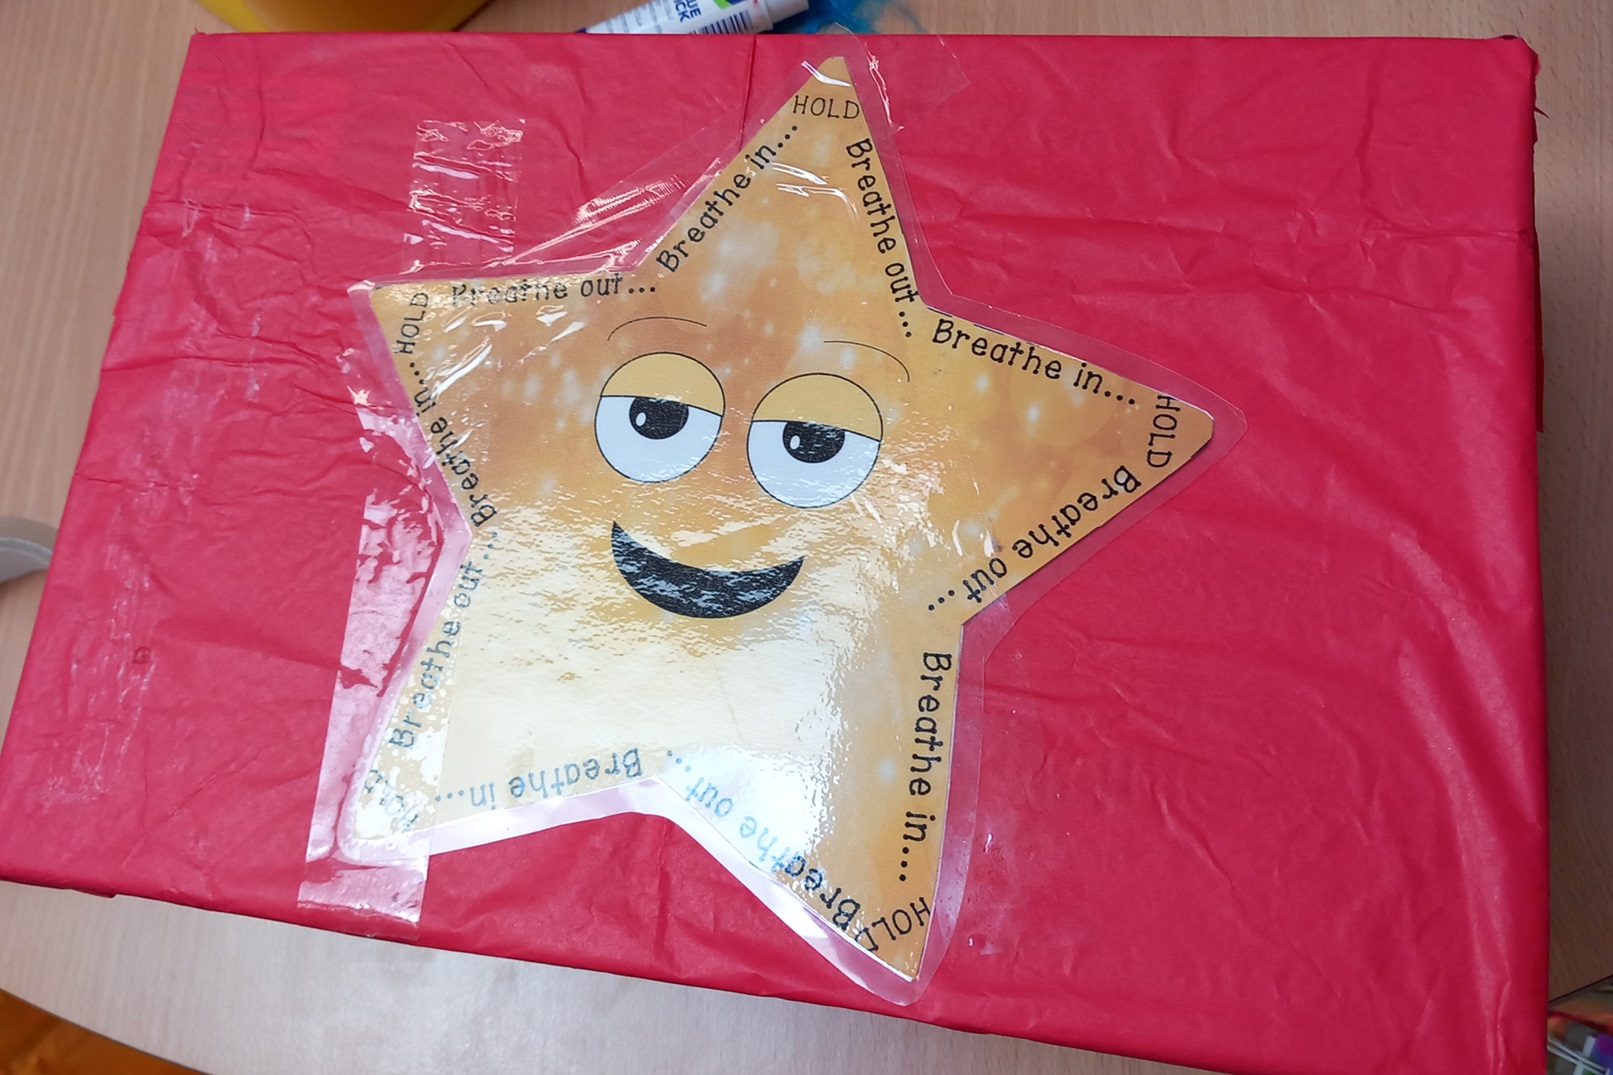 a star with a smiling face, with the words "breathe out...breathe in...HOLD" written around the edges, attached to box surrounded in red crepe paper